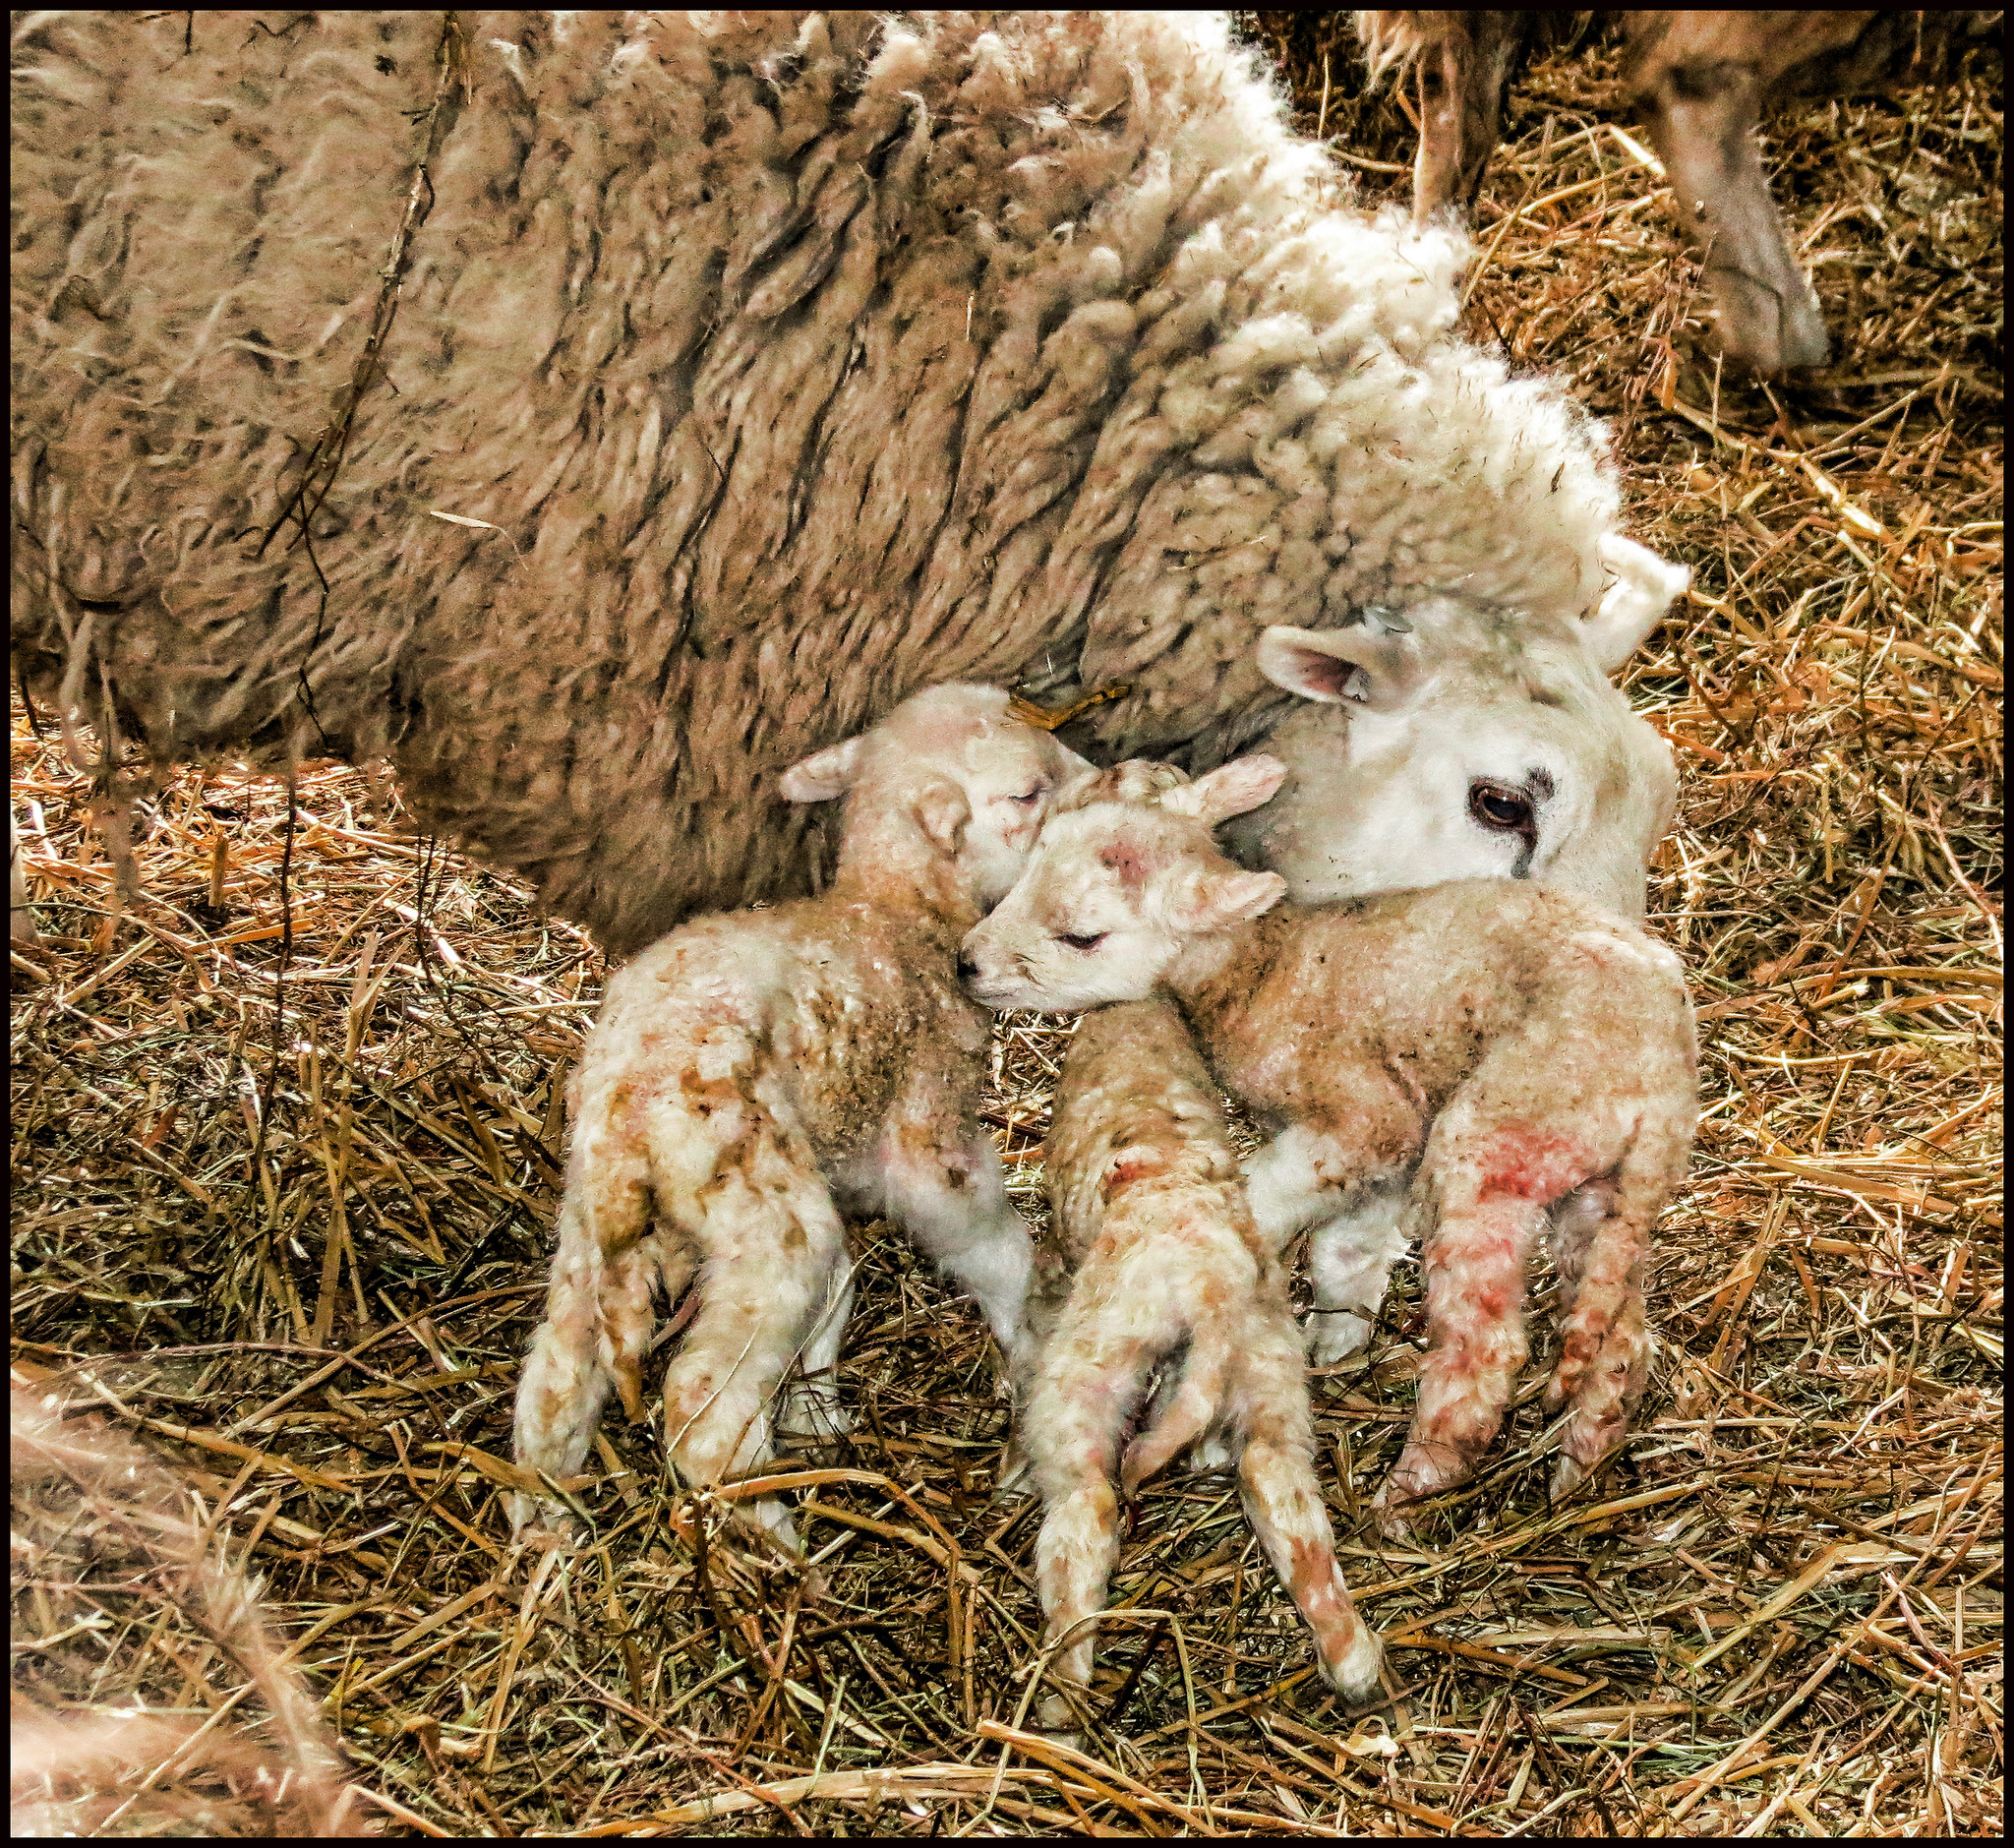 Sheep with baby lambs